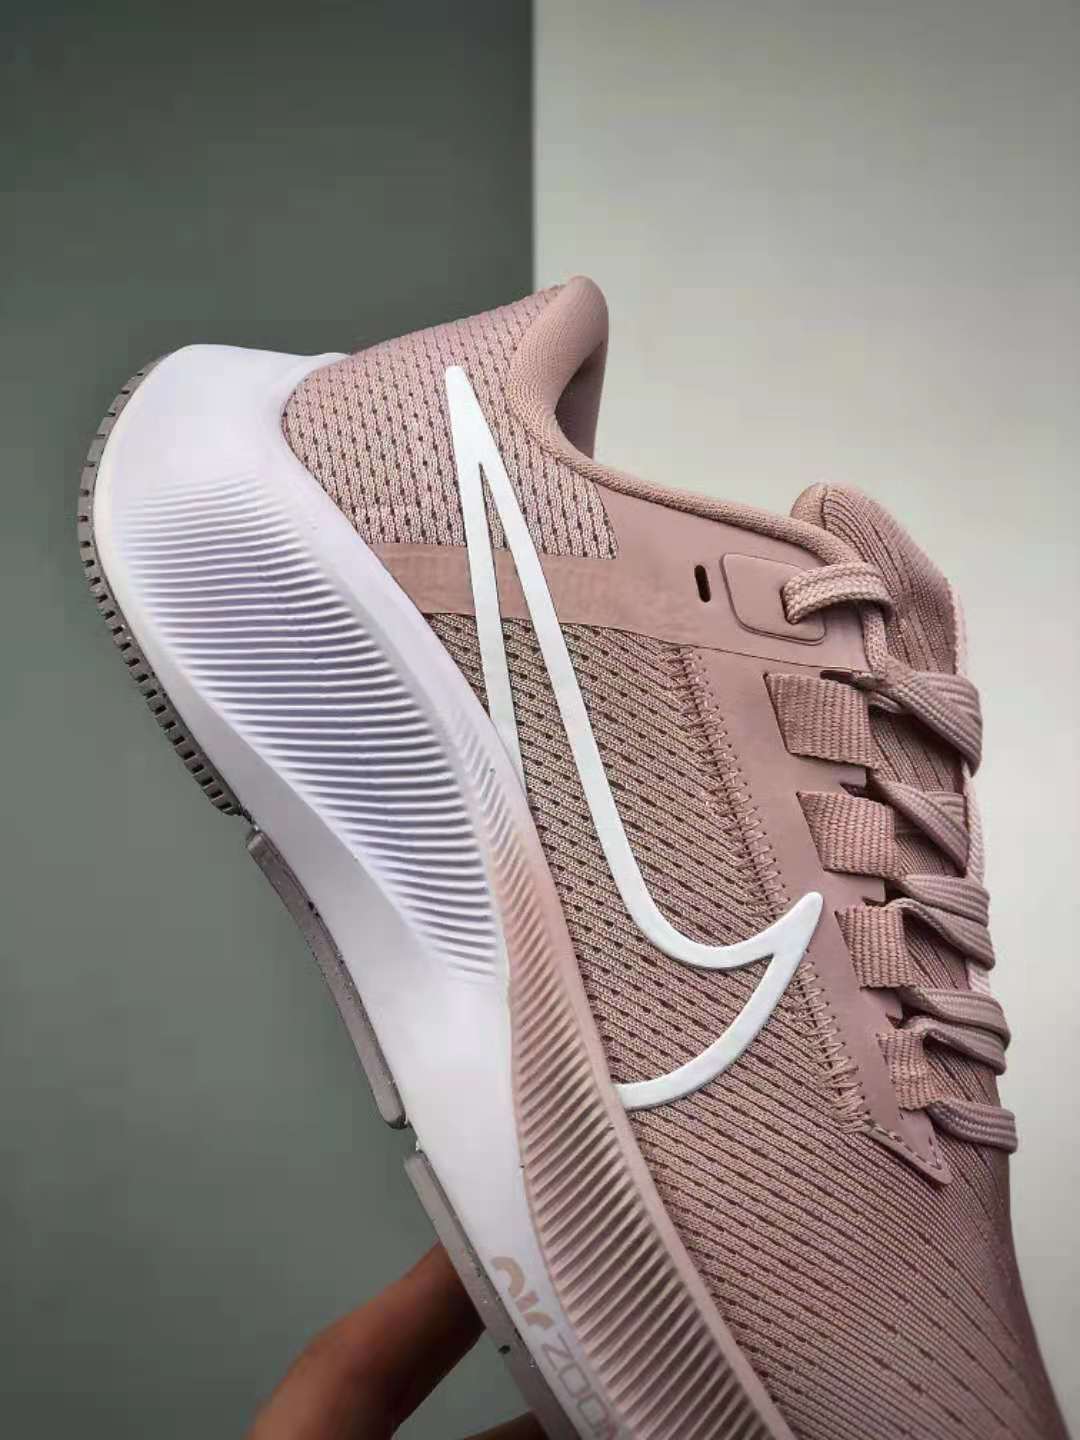 Nike Air Zoom Pegasus 38 'Champagne' CW7358-601 - Stylish and Functional Footwear for All Occasions